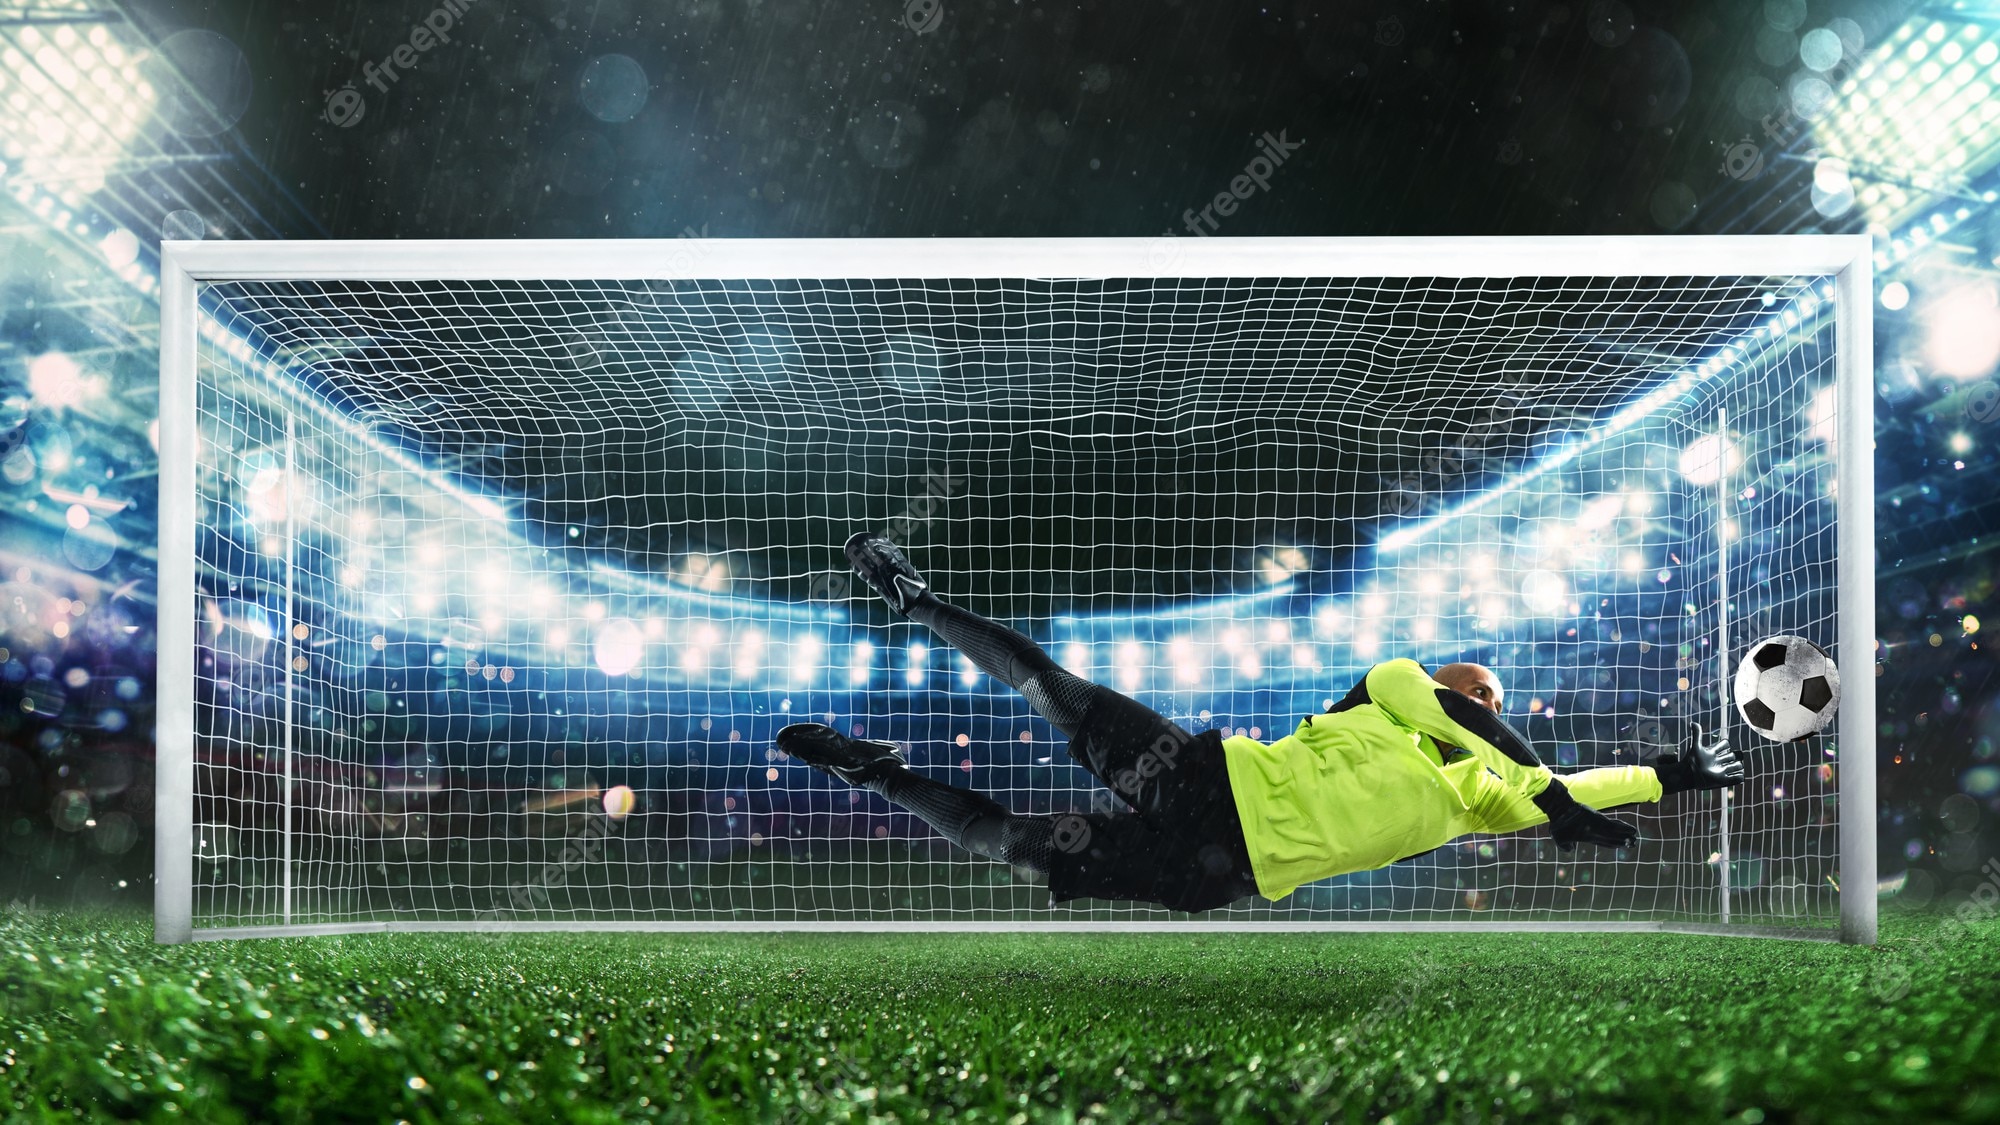 Premium Photo. Soccer goalkeeper in fluorescent uniform that makes a great save and avoids a goal during a match at